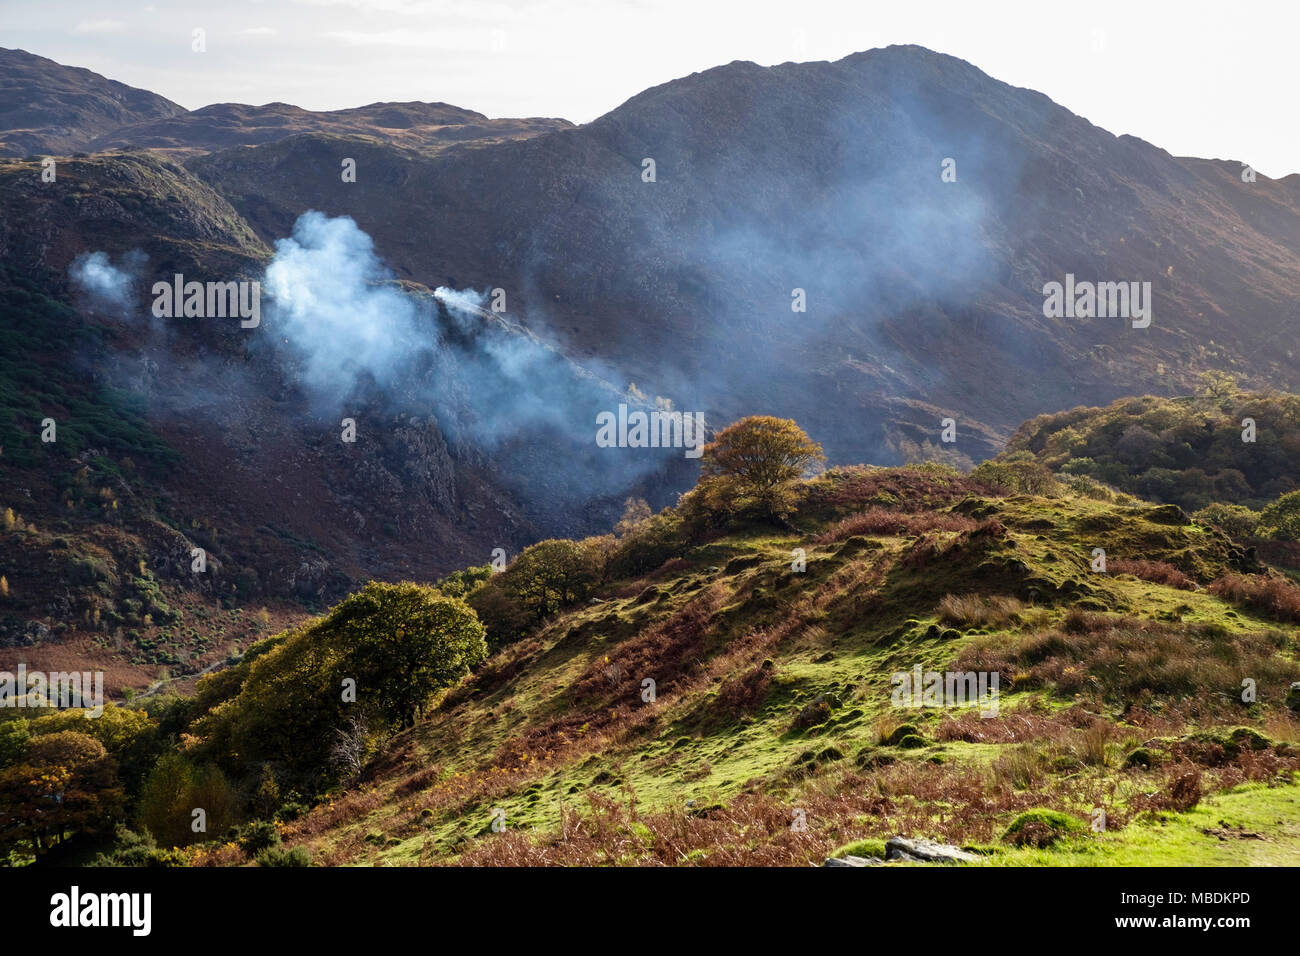 Smoke from fires burning to control Rhododendrons on National Trust hillside above Nant Gwynant in Snowdonia. Beddgelert, Gwynedd, Wales, UK Stock Photo